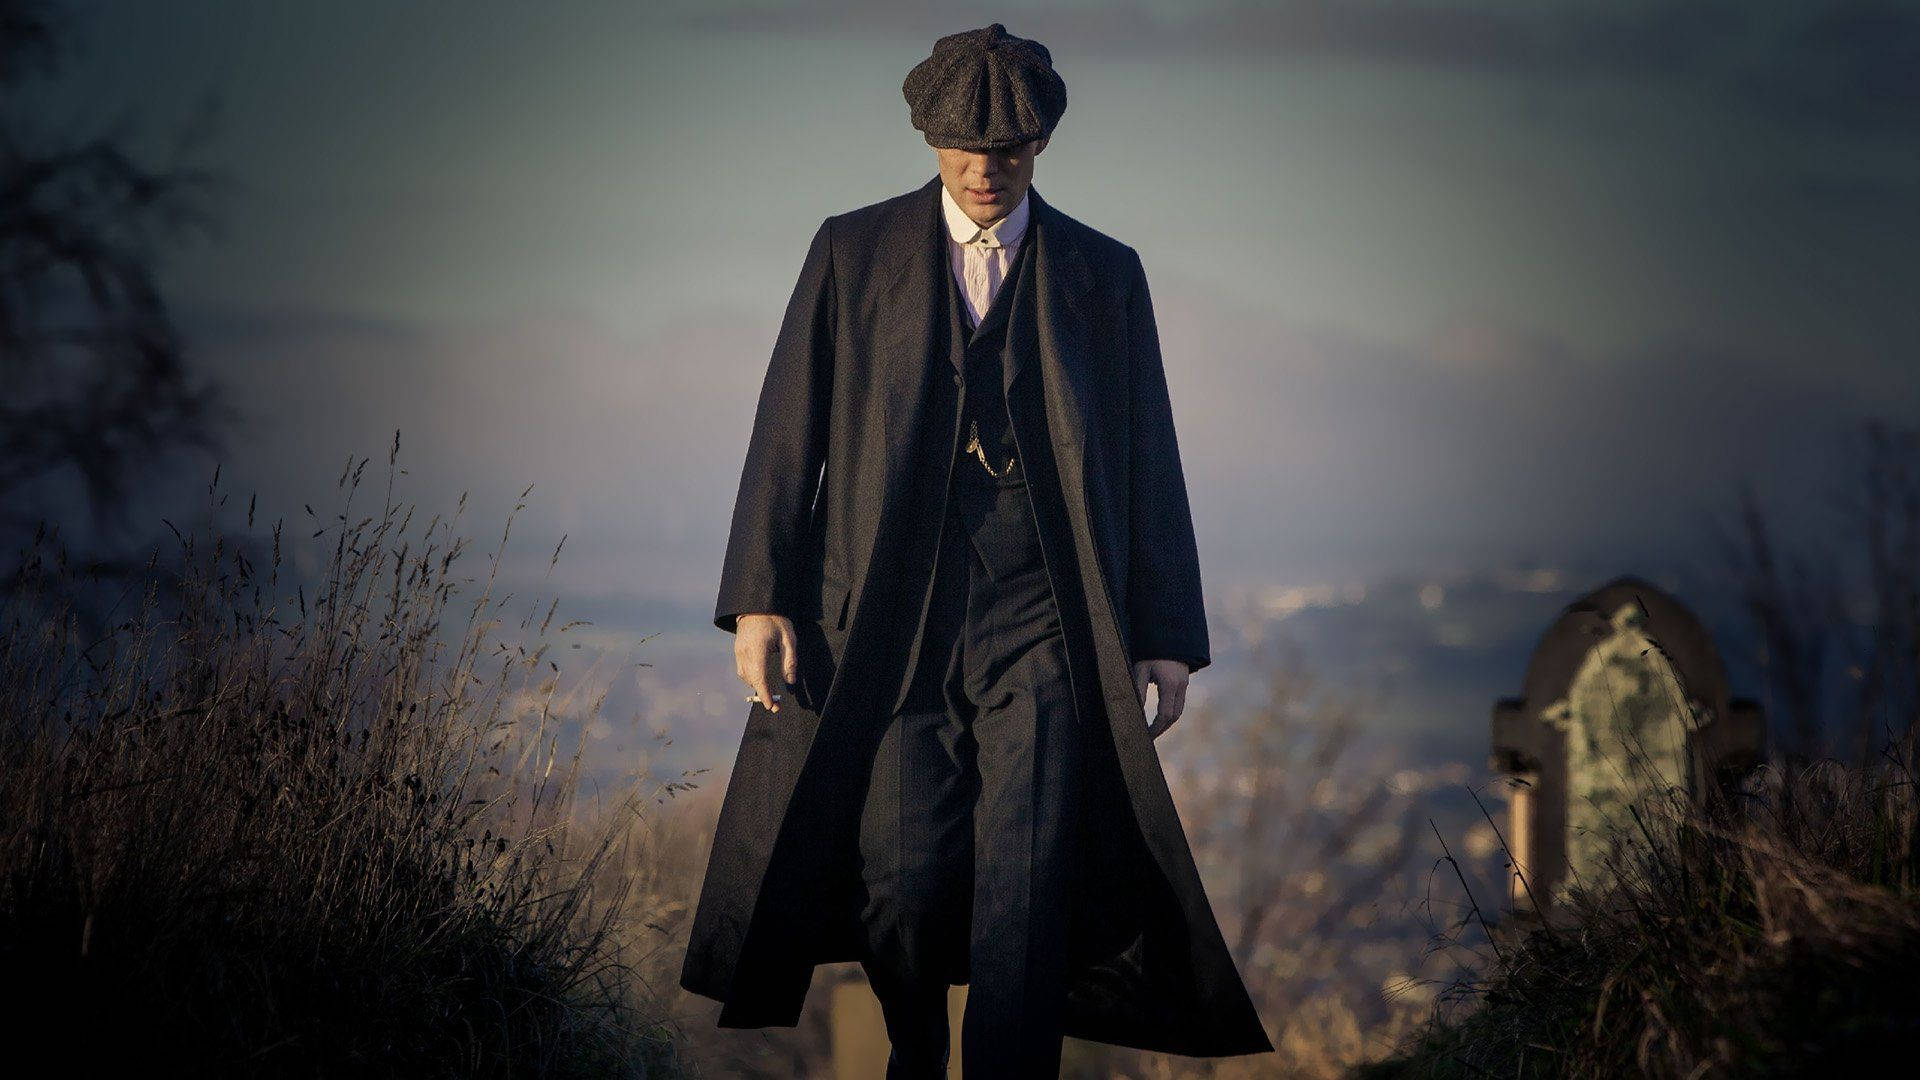 The Calmness Of Thomas Peaky Blinders Background